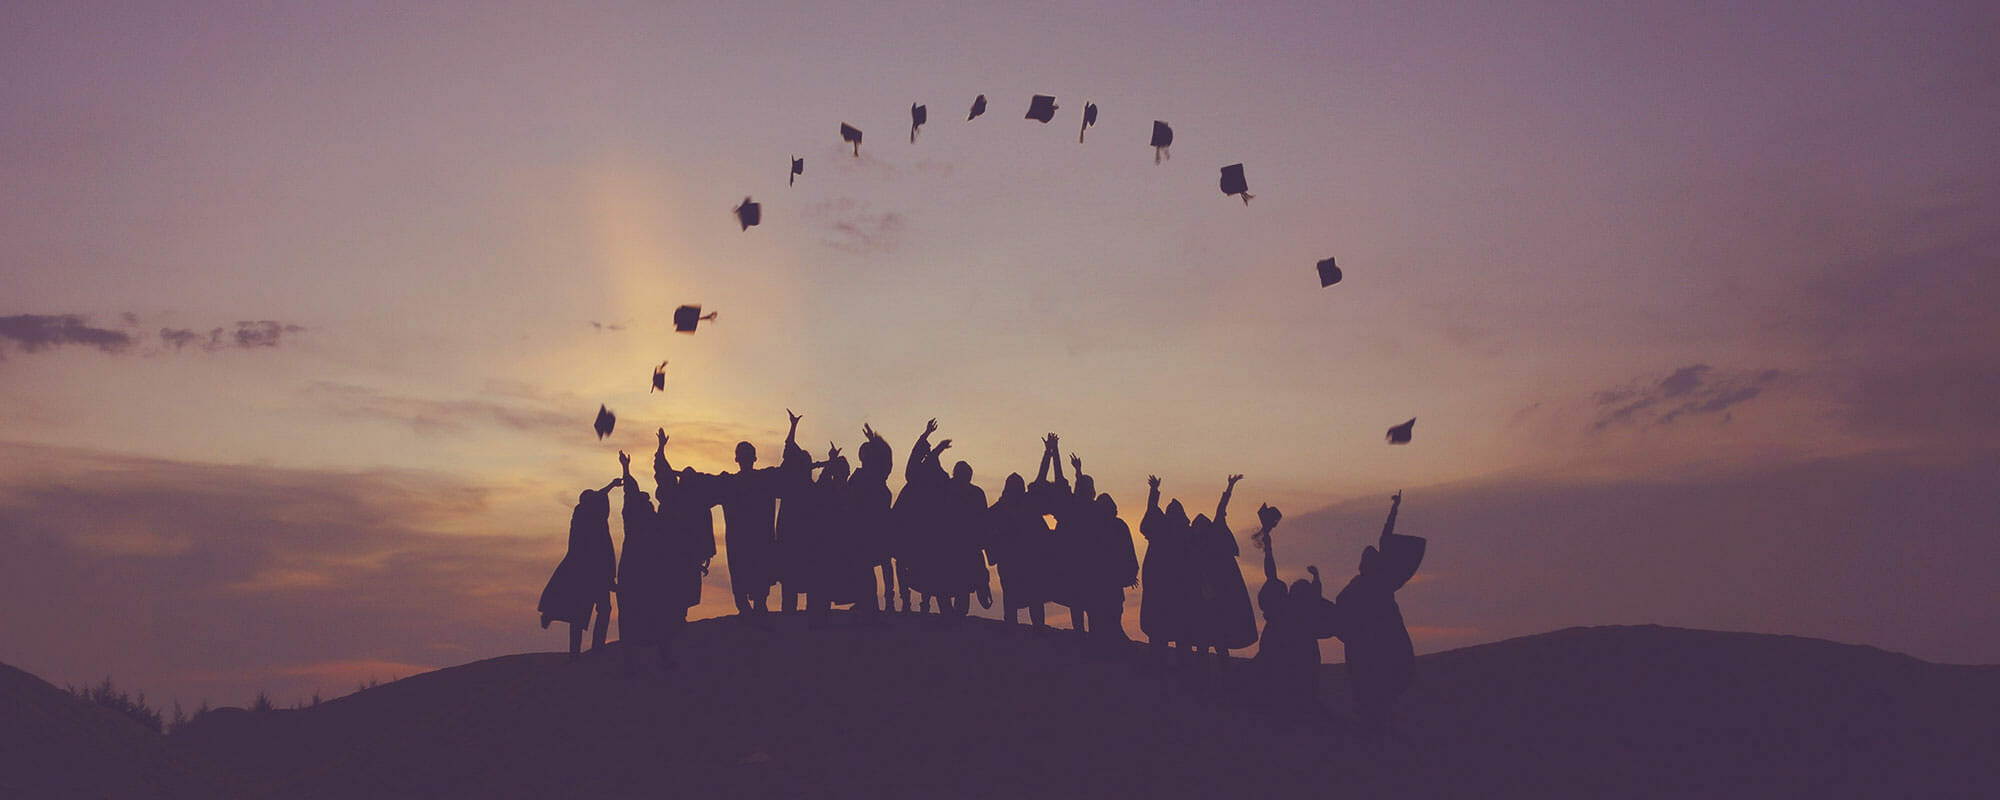 Students throwing graduation caps in an arch